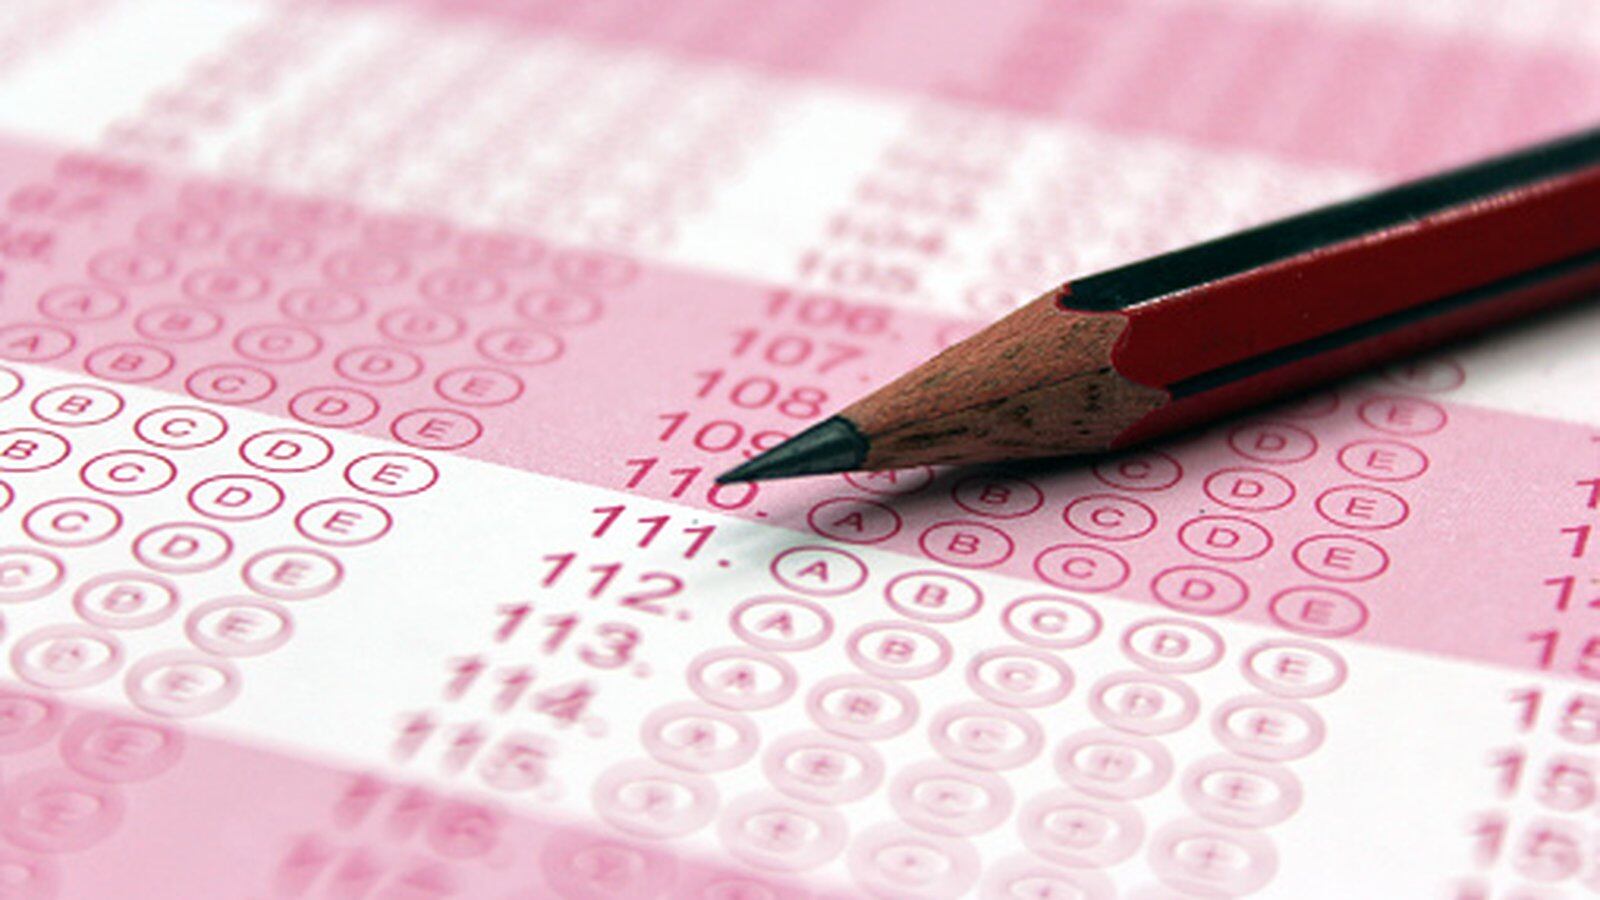 New York will release state test scores later this month.